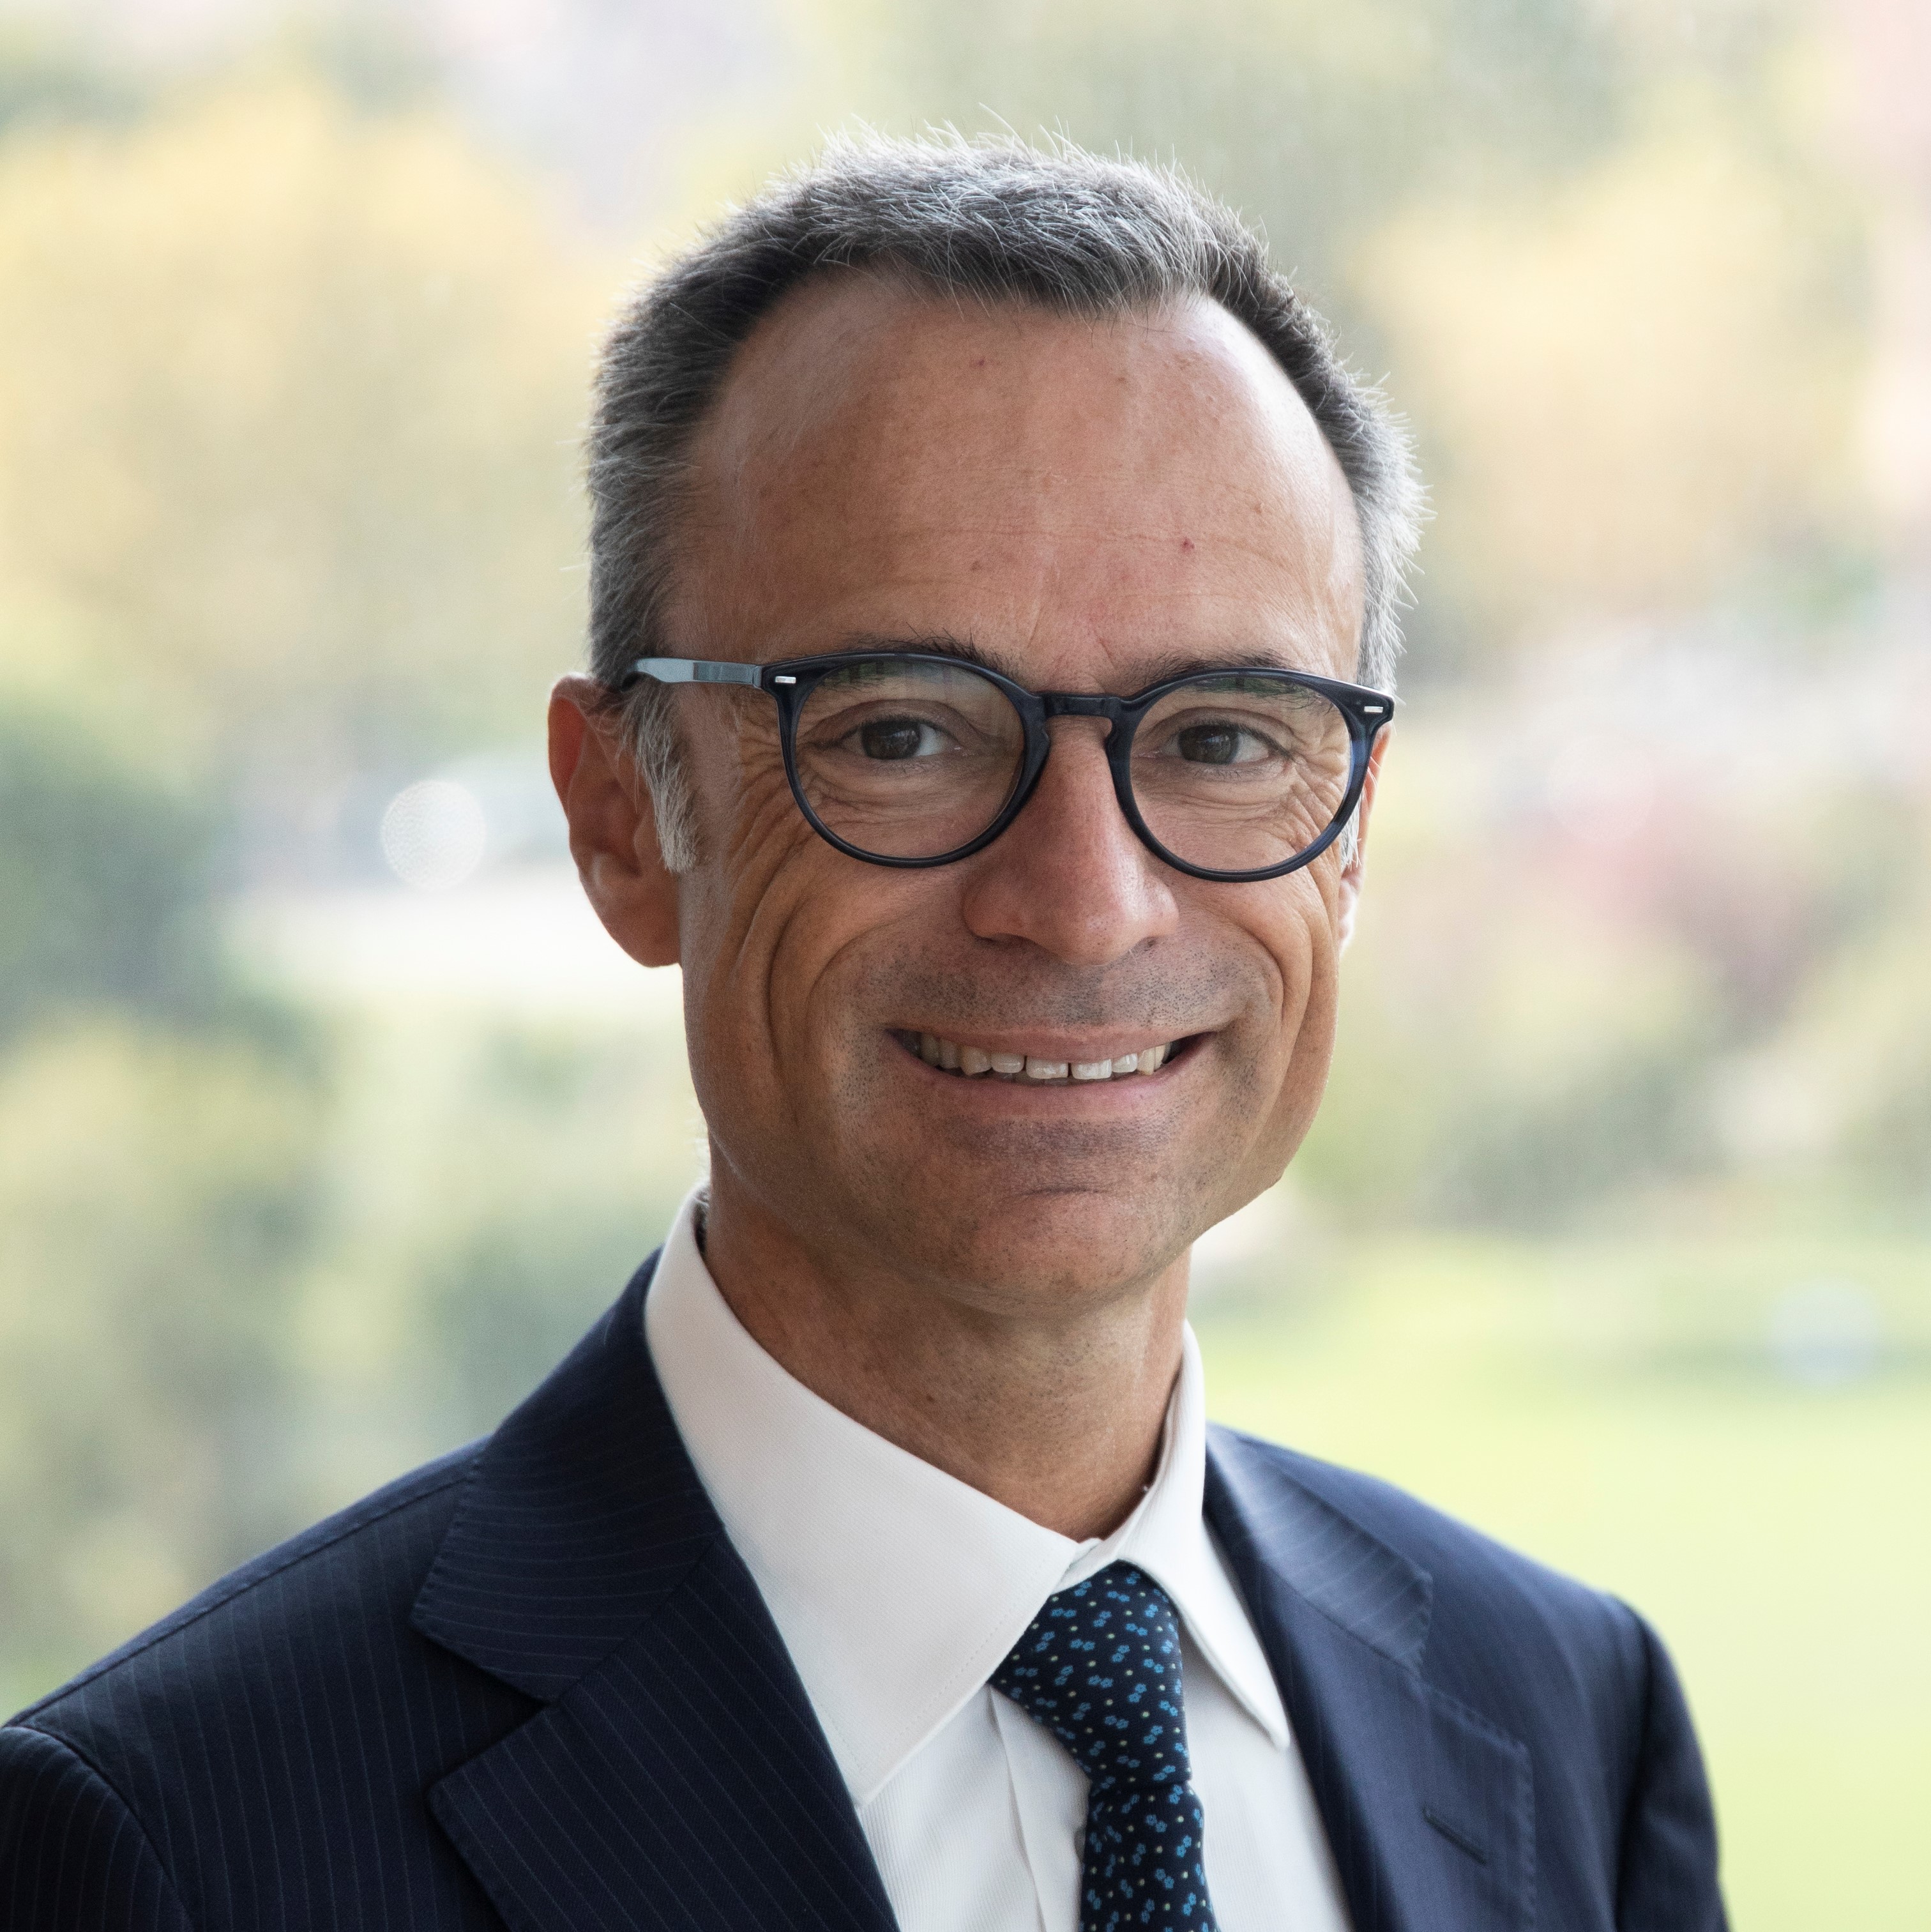 Prof Francesco Rattalino - Executive Vice-President in charge of Academic Affairs and Student Experience at ESCP Business School